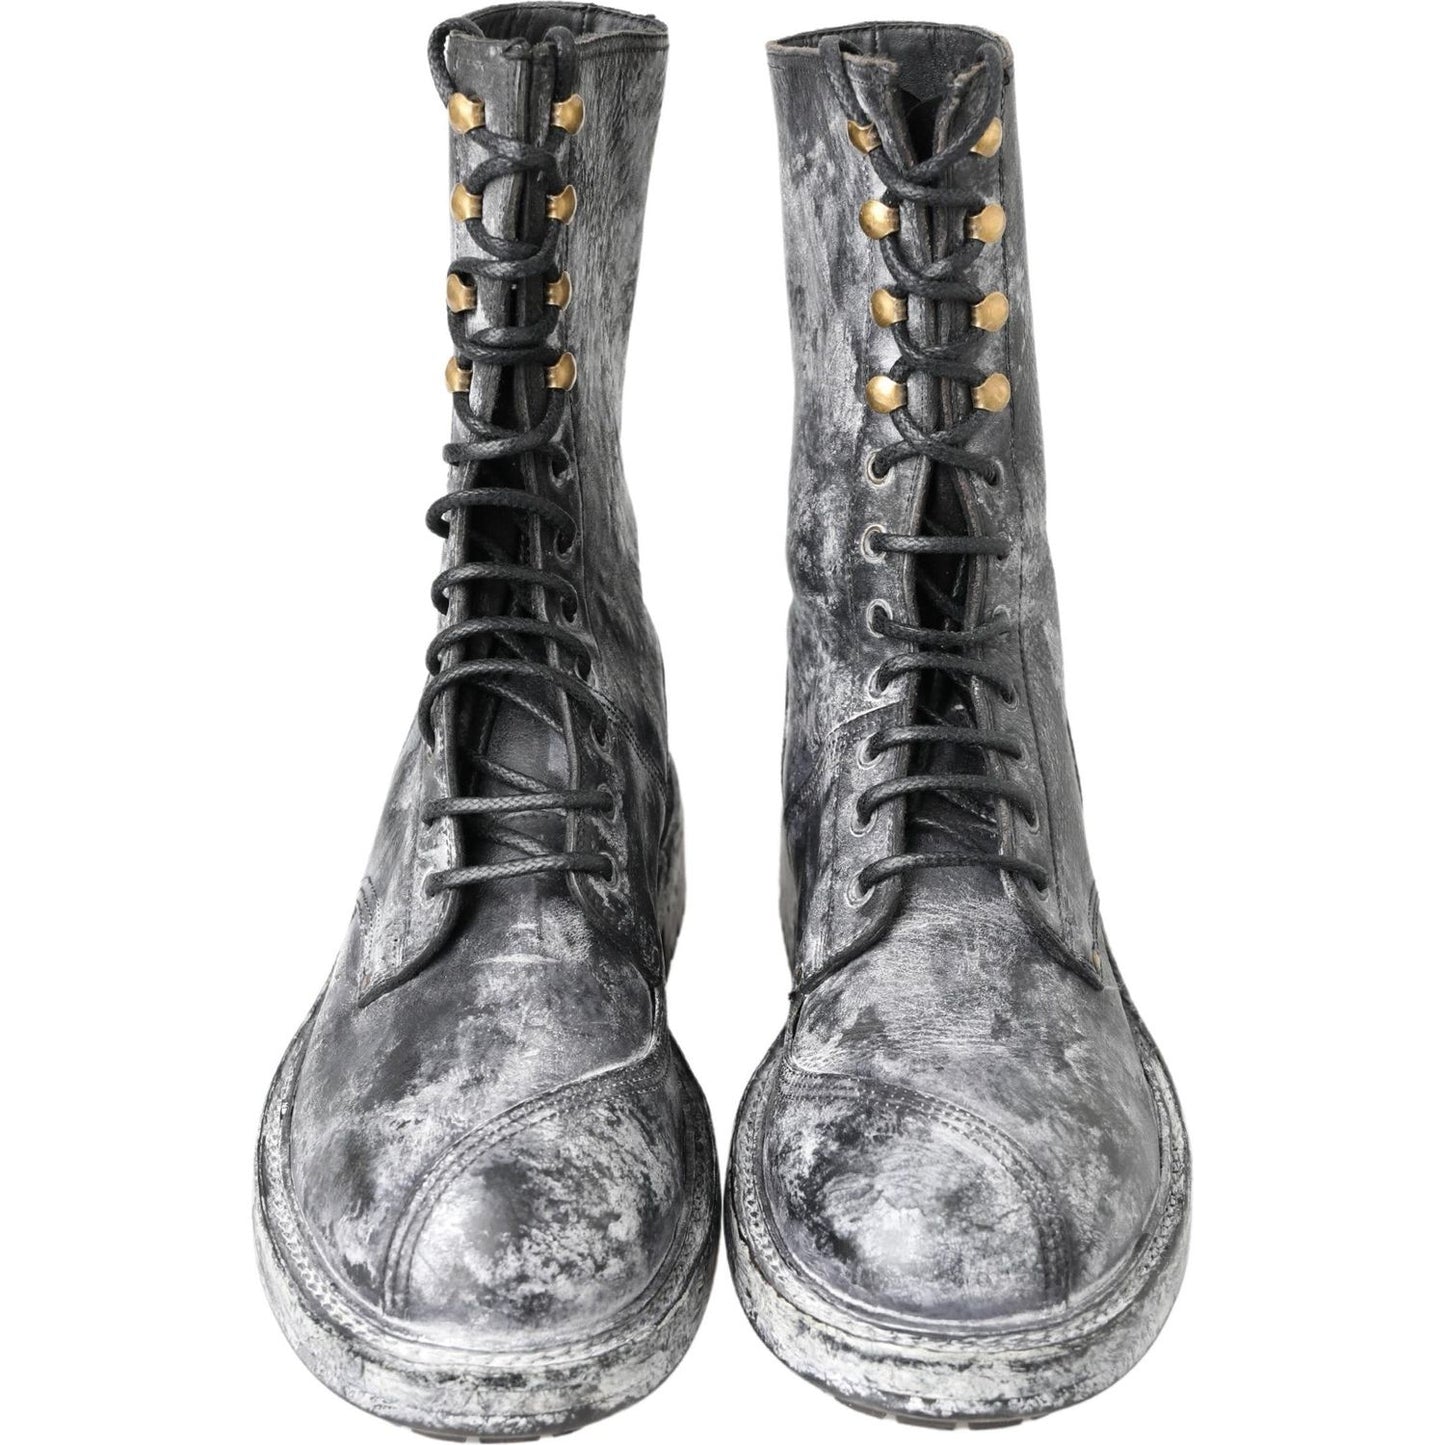 Dolce & Gabbana Chic Black Lace-Up Boots with Gray White Fade black-gray-leather-mid-calf-boots-shoes